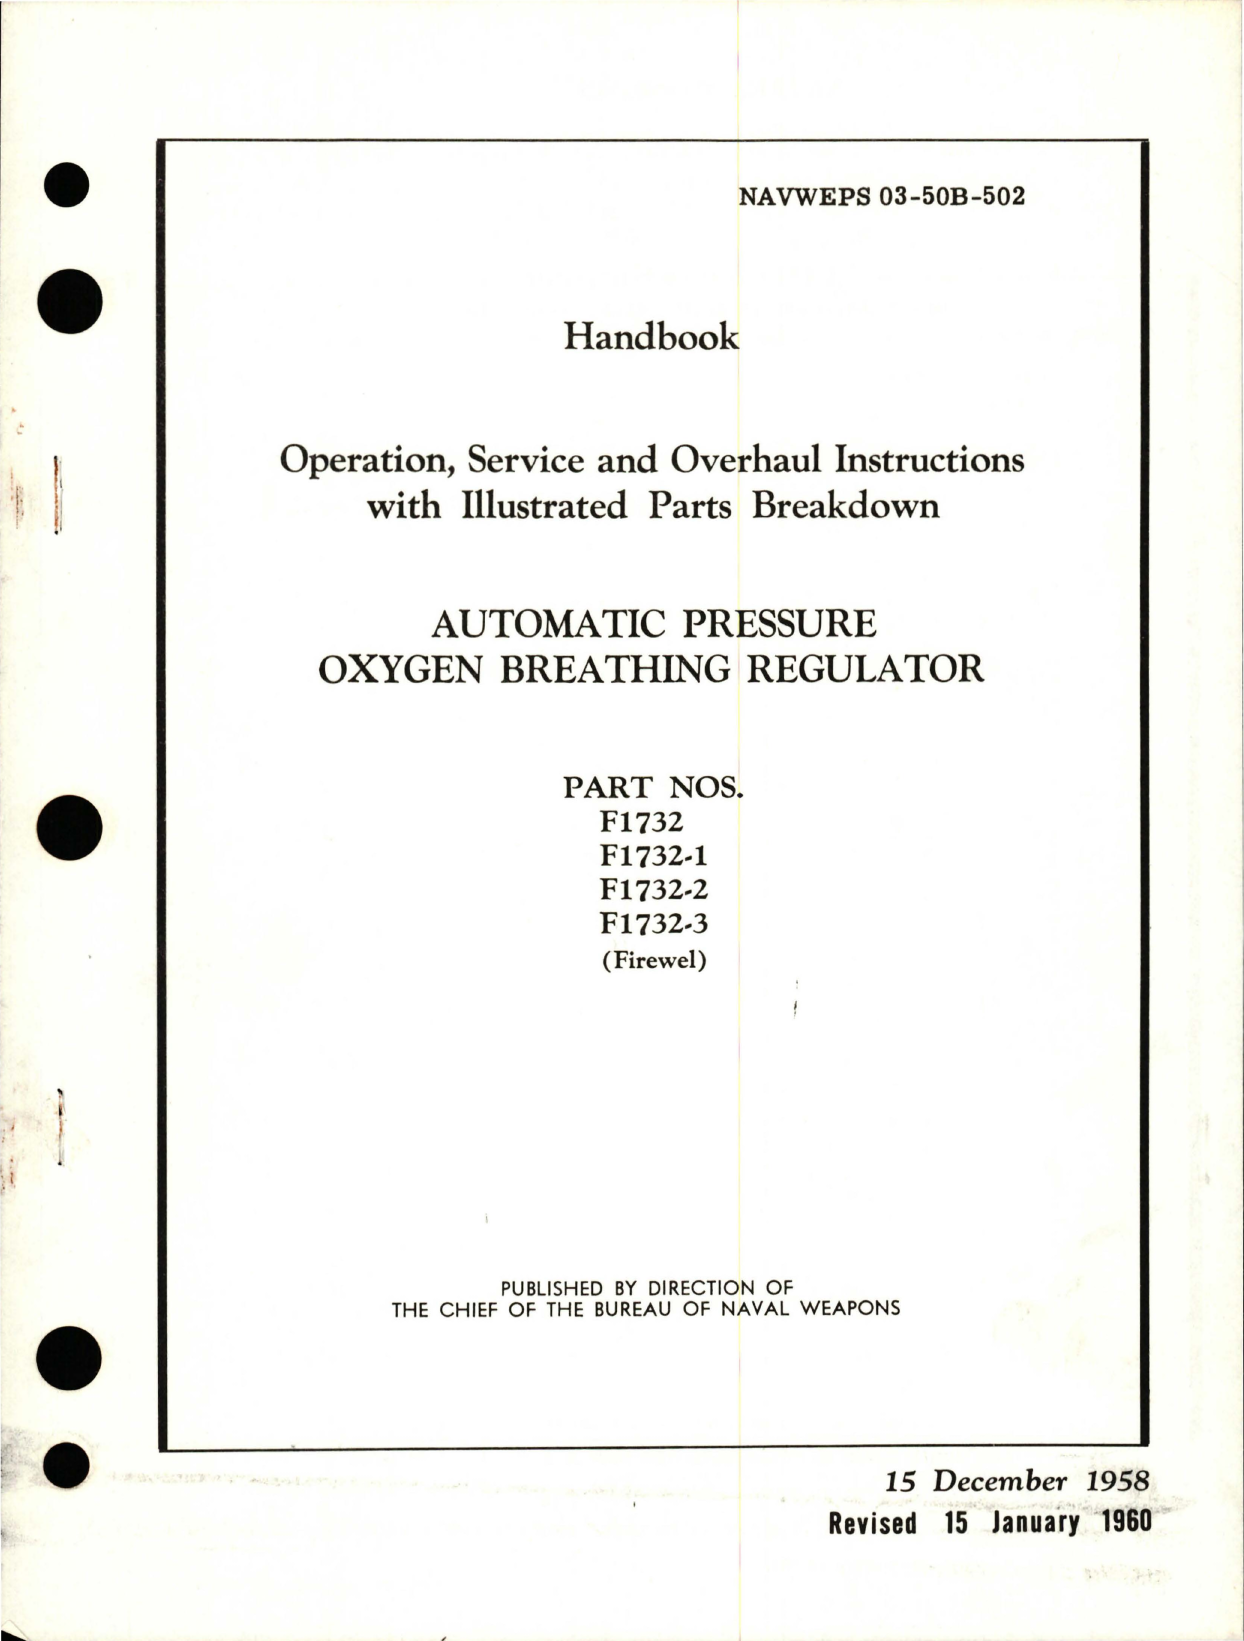 Sample page 1 from AirCorps Library document: Operation, Service, and Overhaul Instructions with Illustrated Parts Breakdown for Automatic Pressure Oxygen Breathing Regulator - Parts F1732, F1732-1, F1732-2, and F1732-3